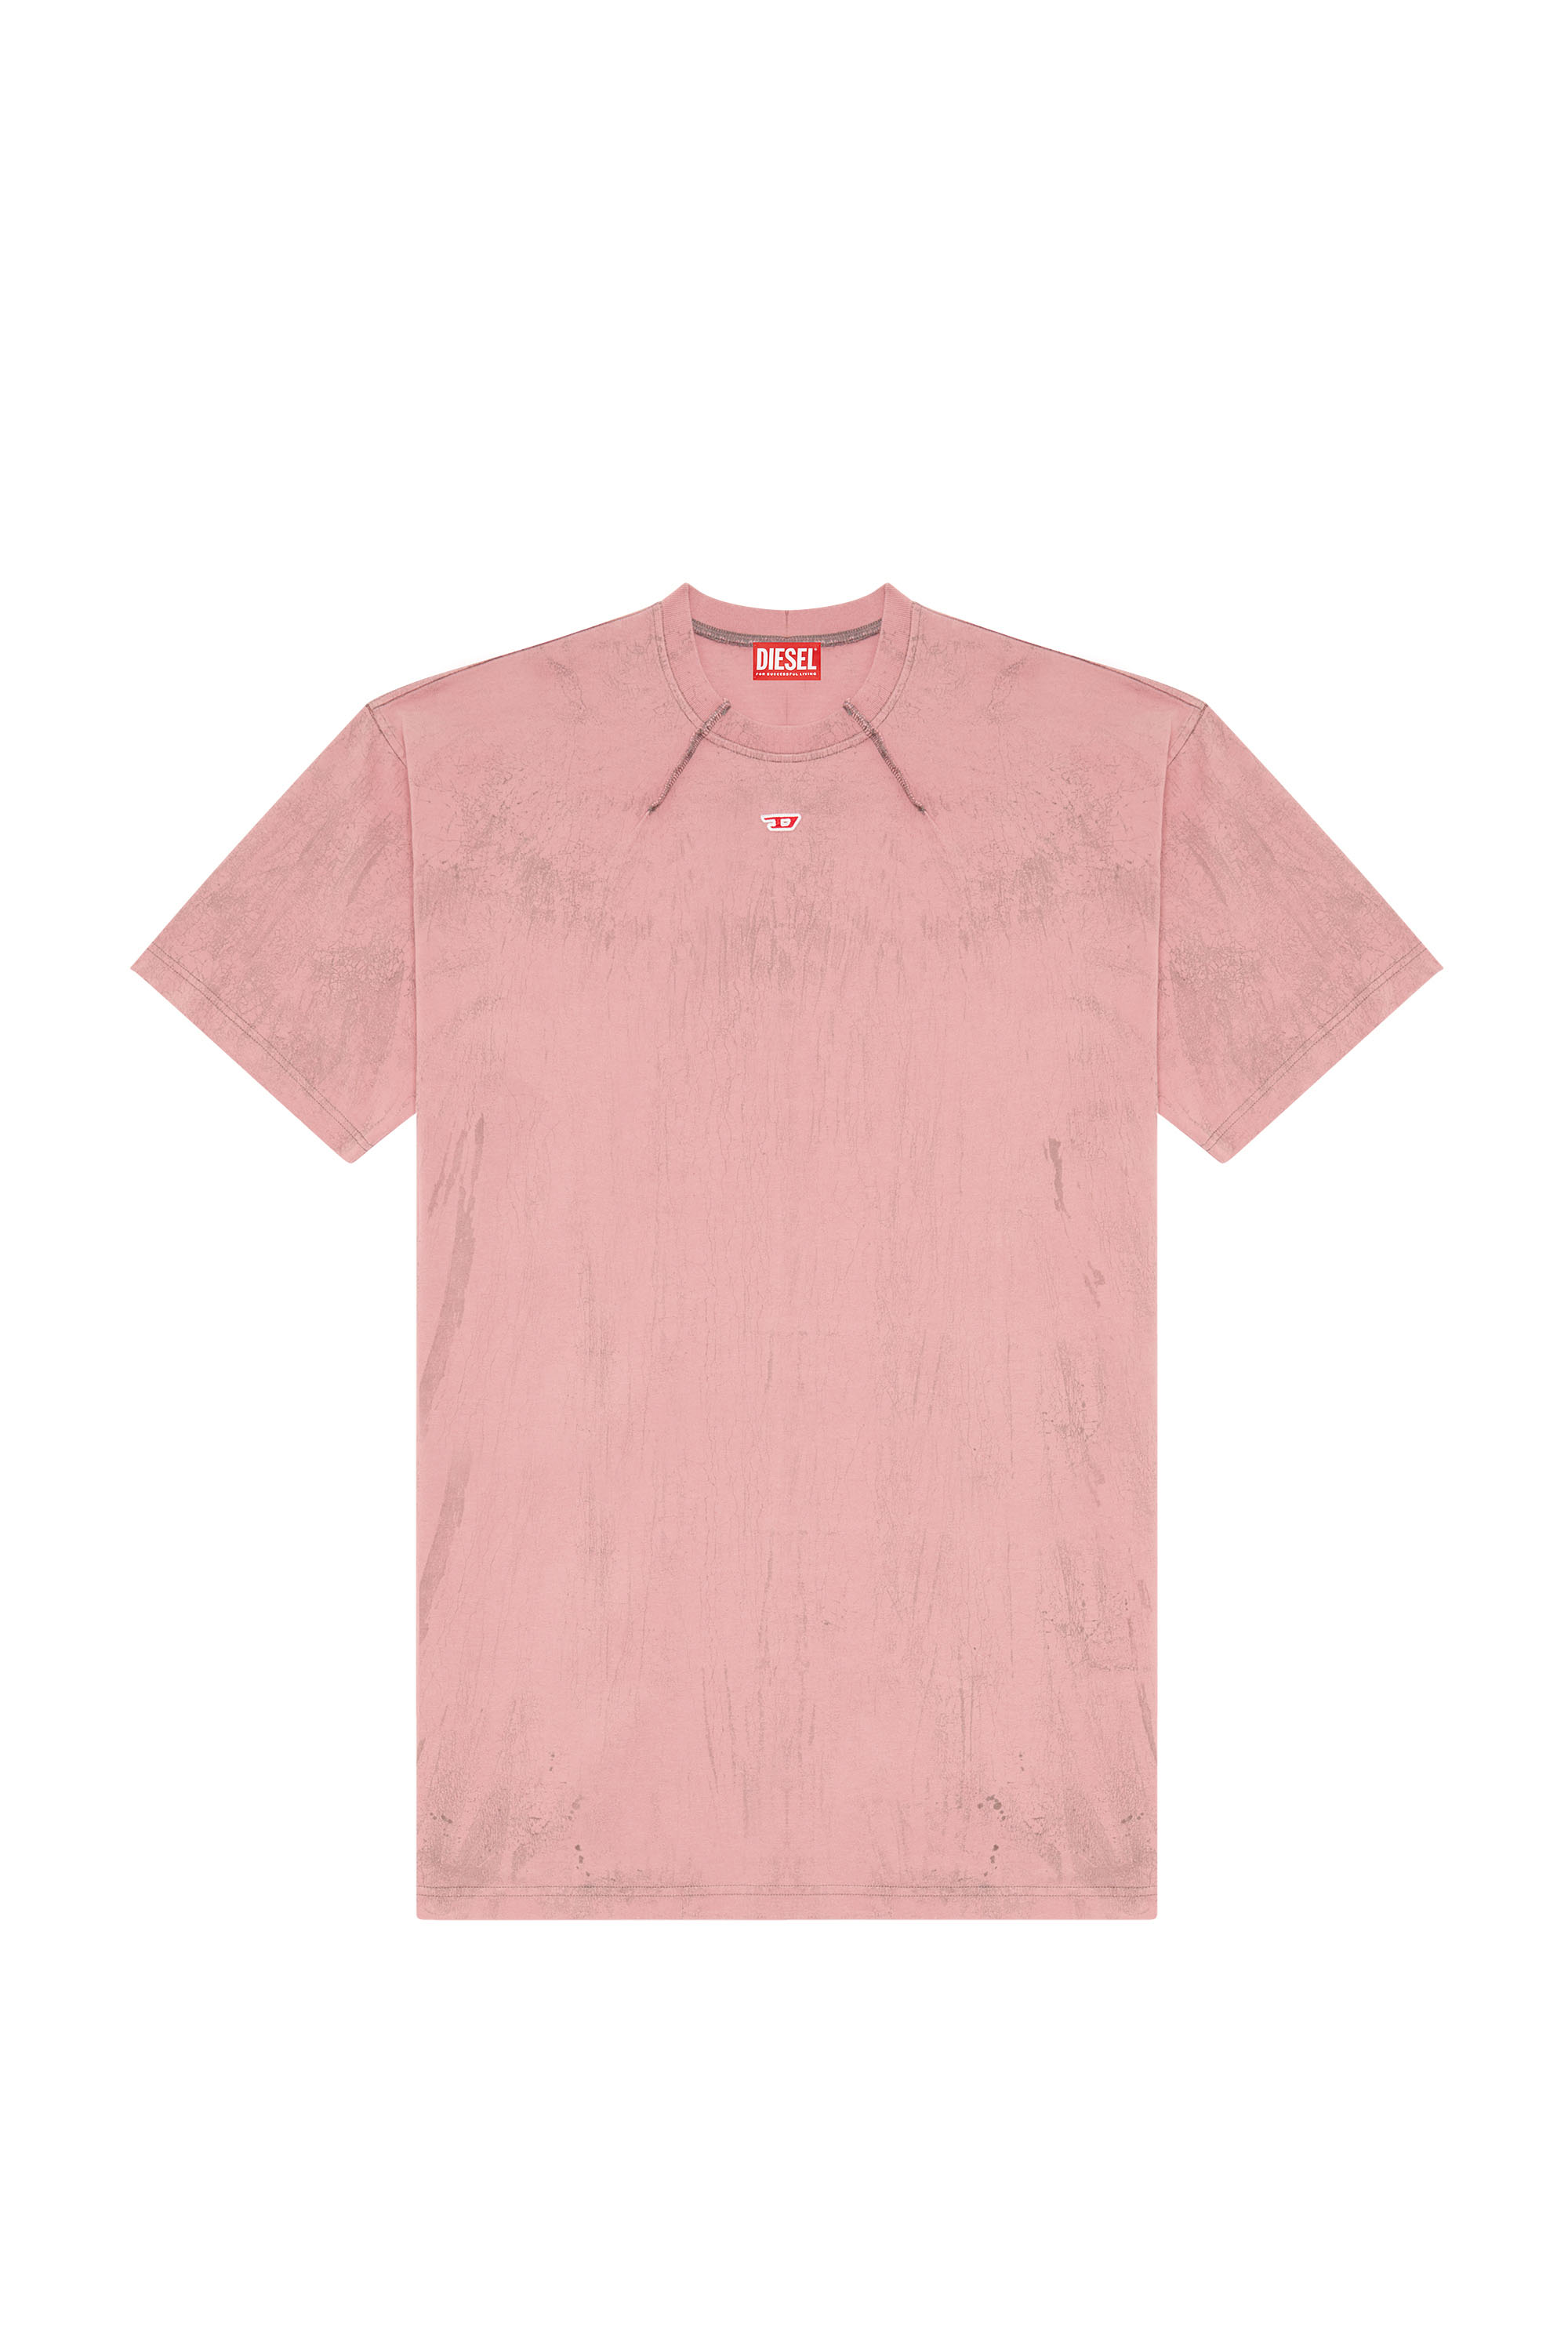 Diesel - T-COS, Man T-shirt in plaster effect jersey in Pink - Image 3